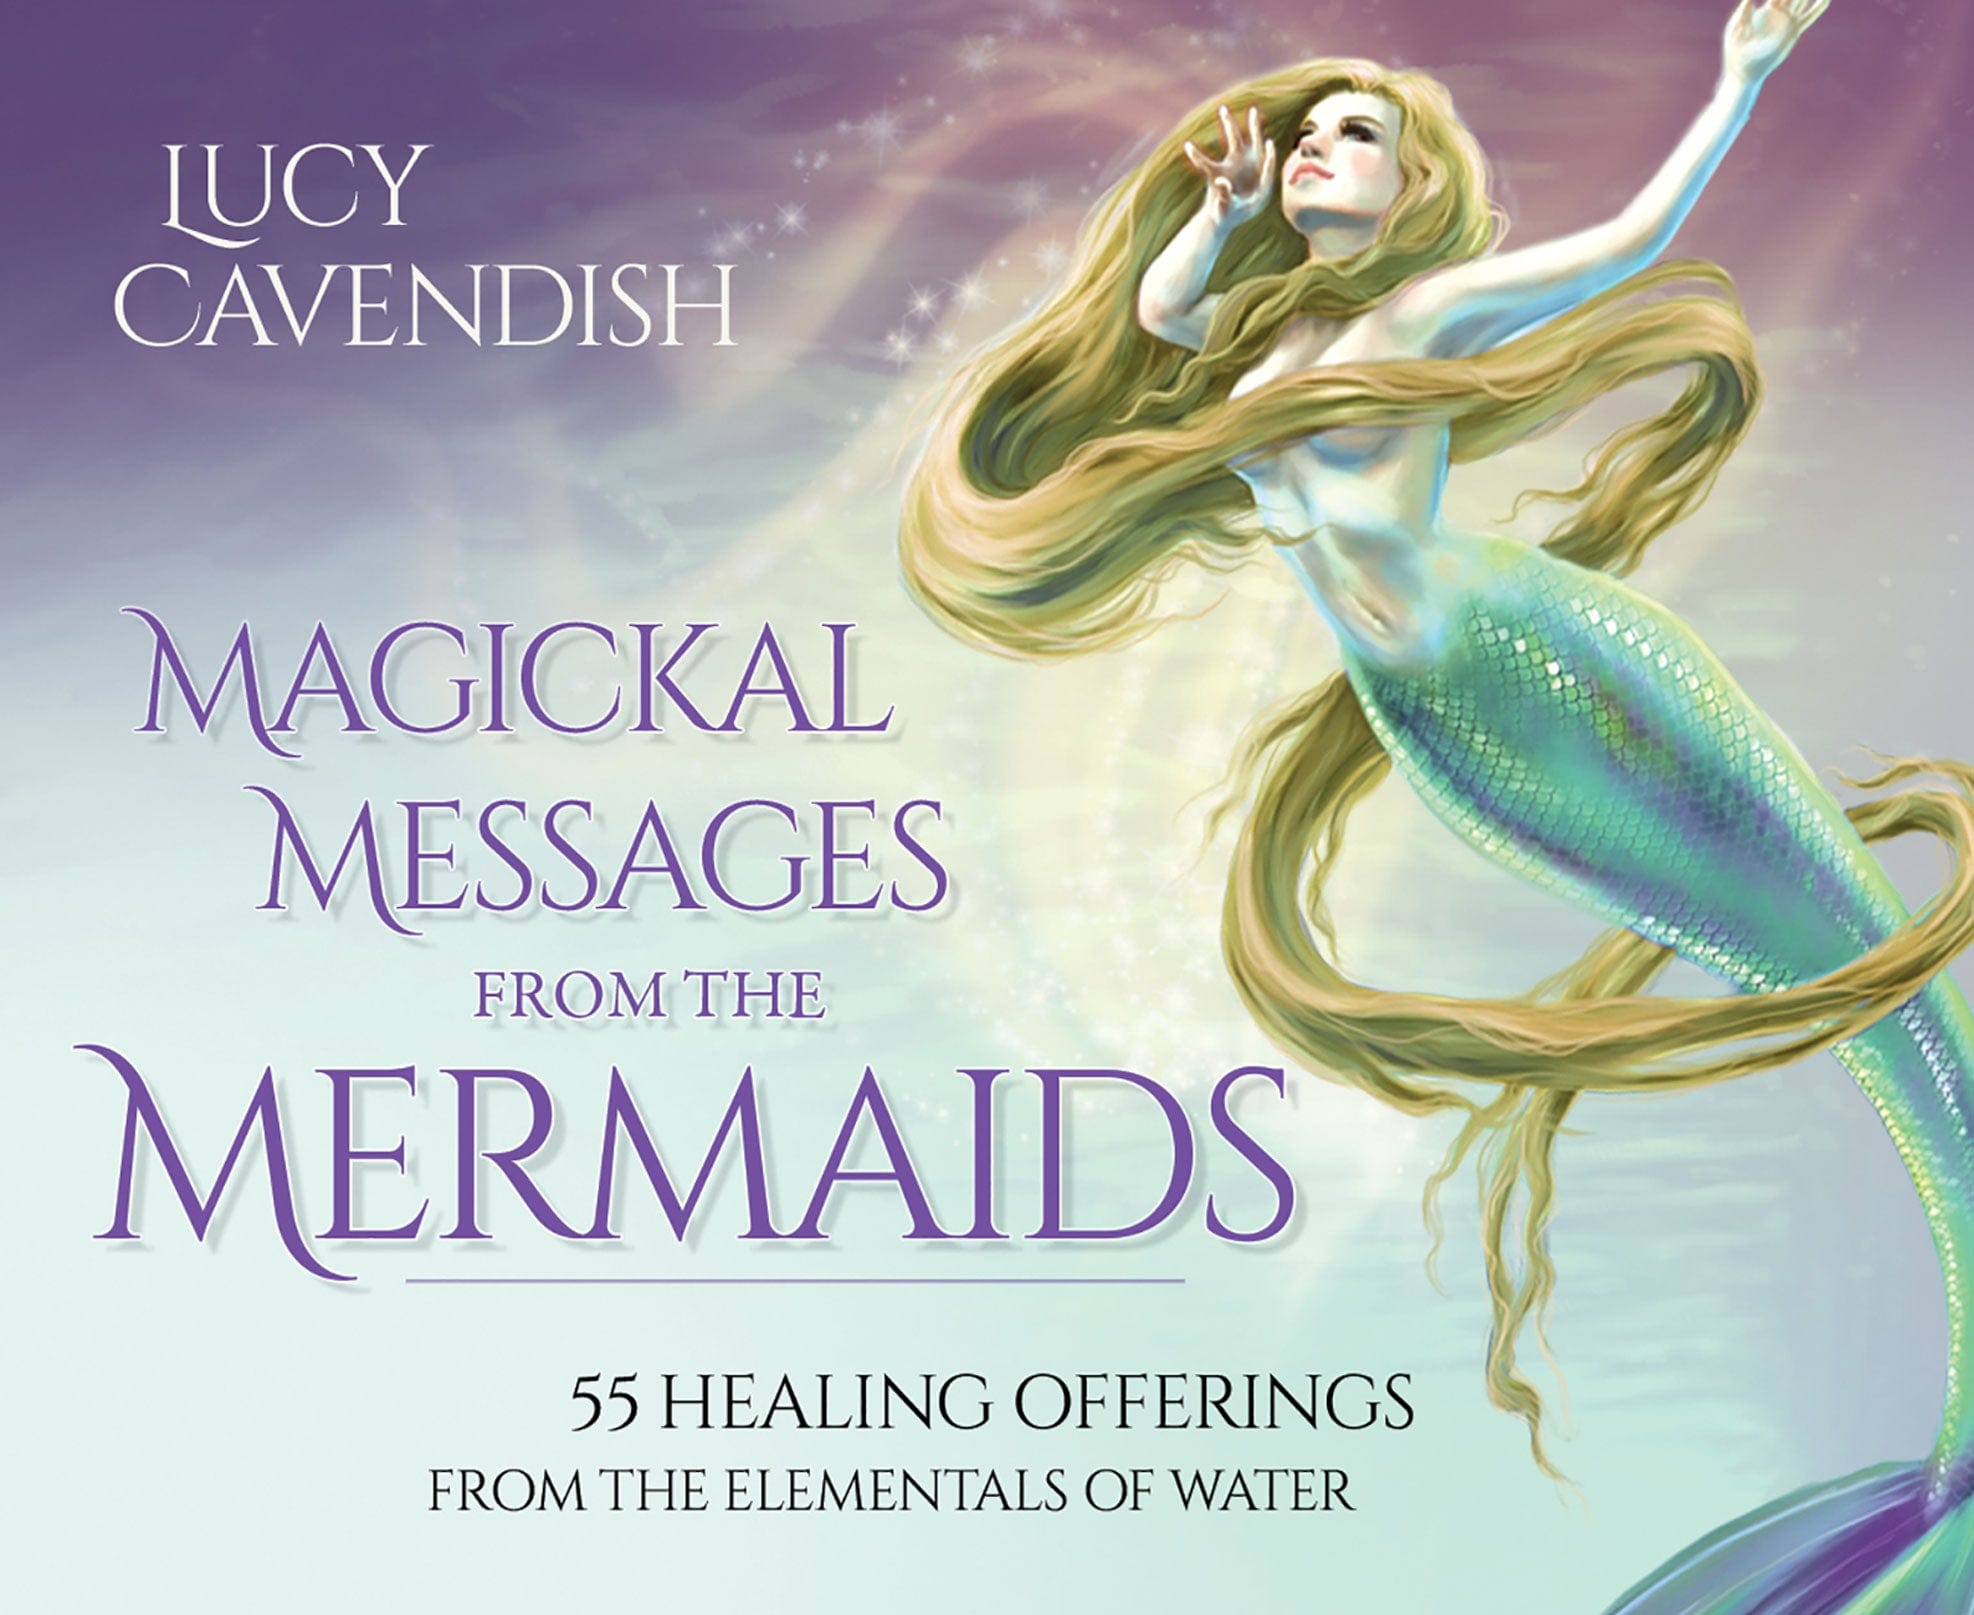 Magickal Messages From The Mermaids by Lucy Cavendish